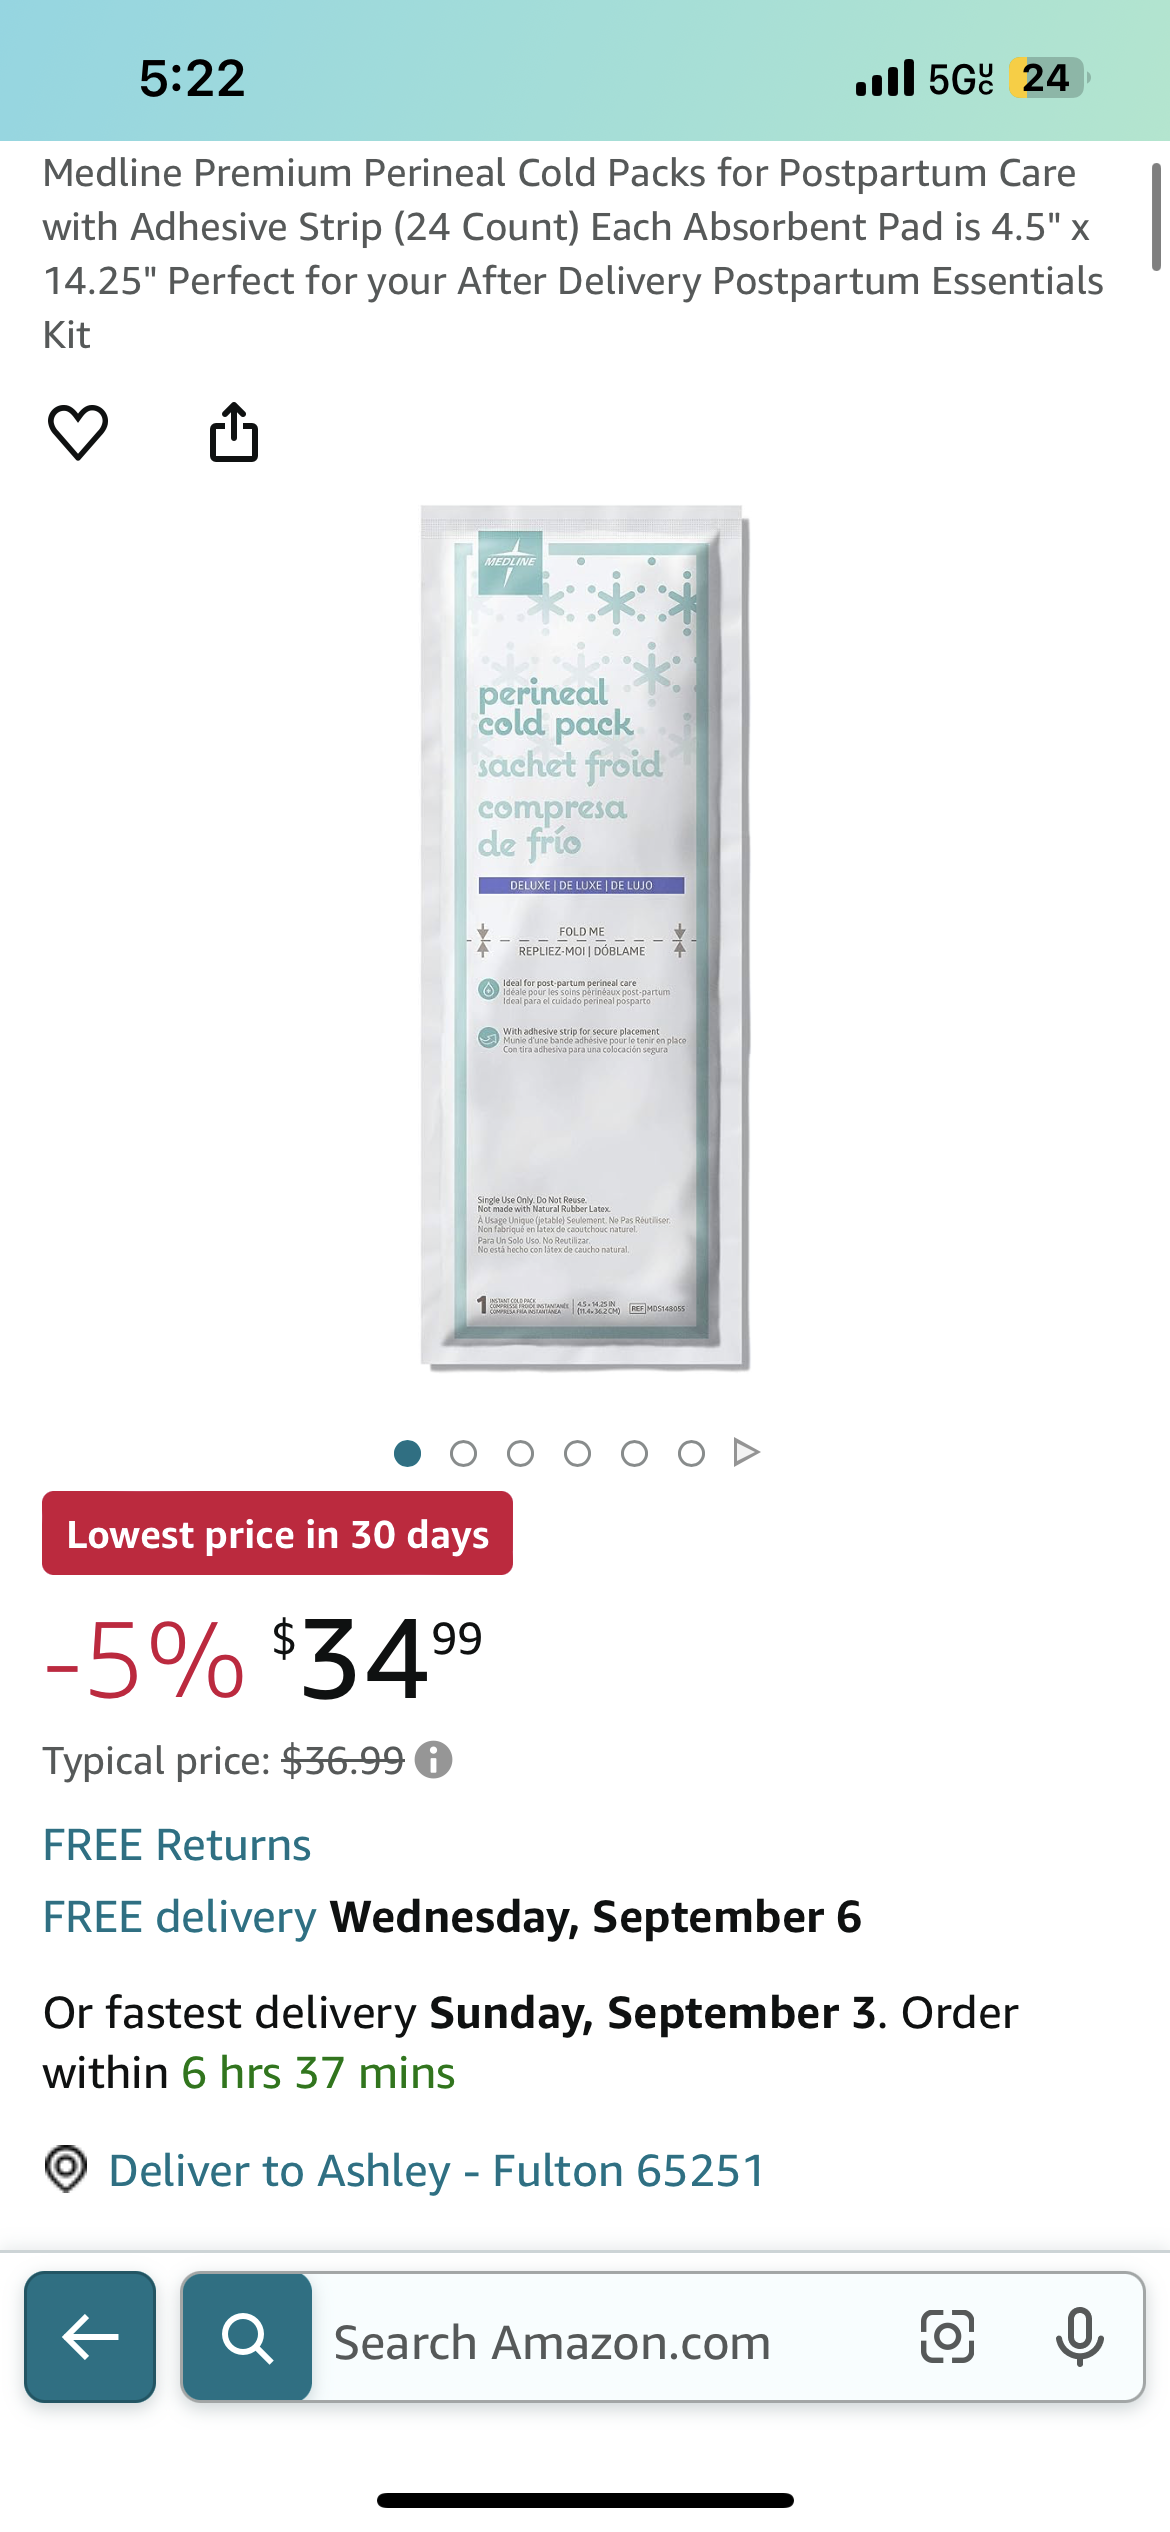 Medline Premium Perineal Cold Packs for Postpartum Care with Adhesive Strip (24 Count) Each Absorbent Pad is 4.5" x 14.25" Perfect for your After Delivery Postpartum Essentials Kit